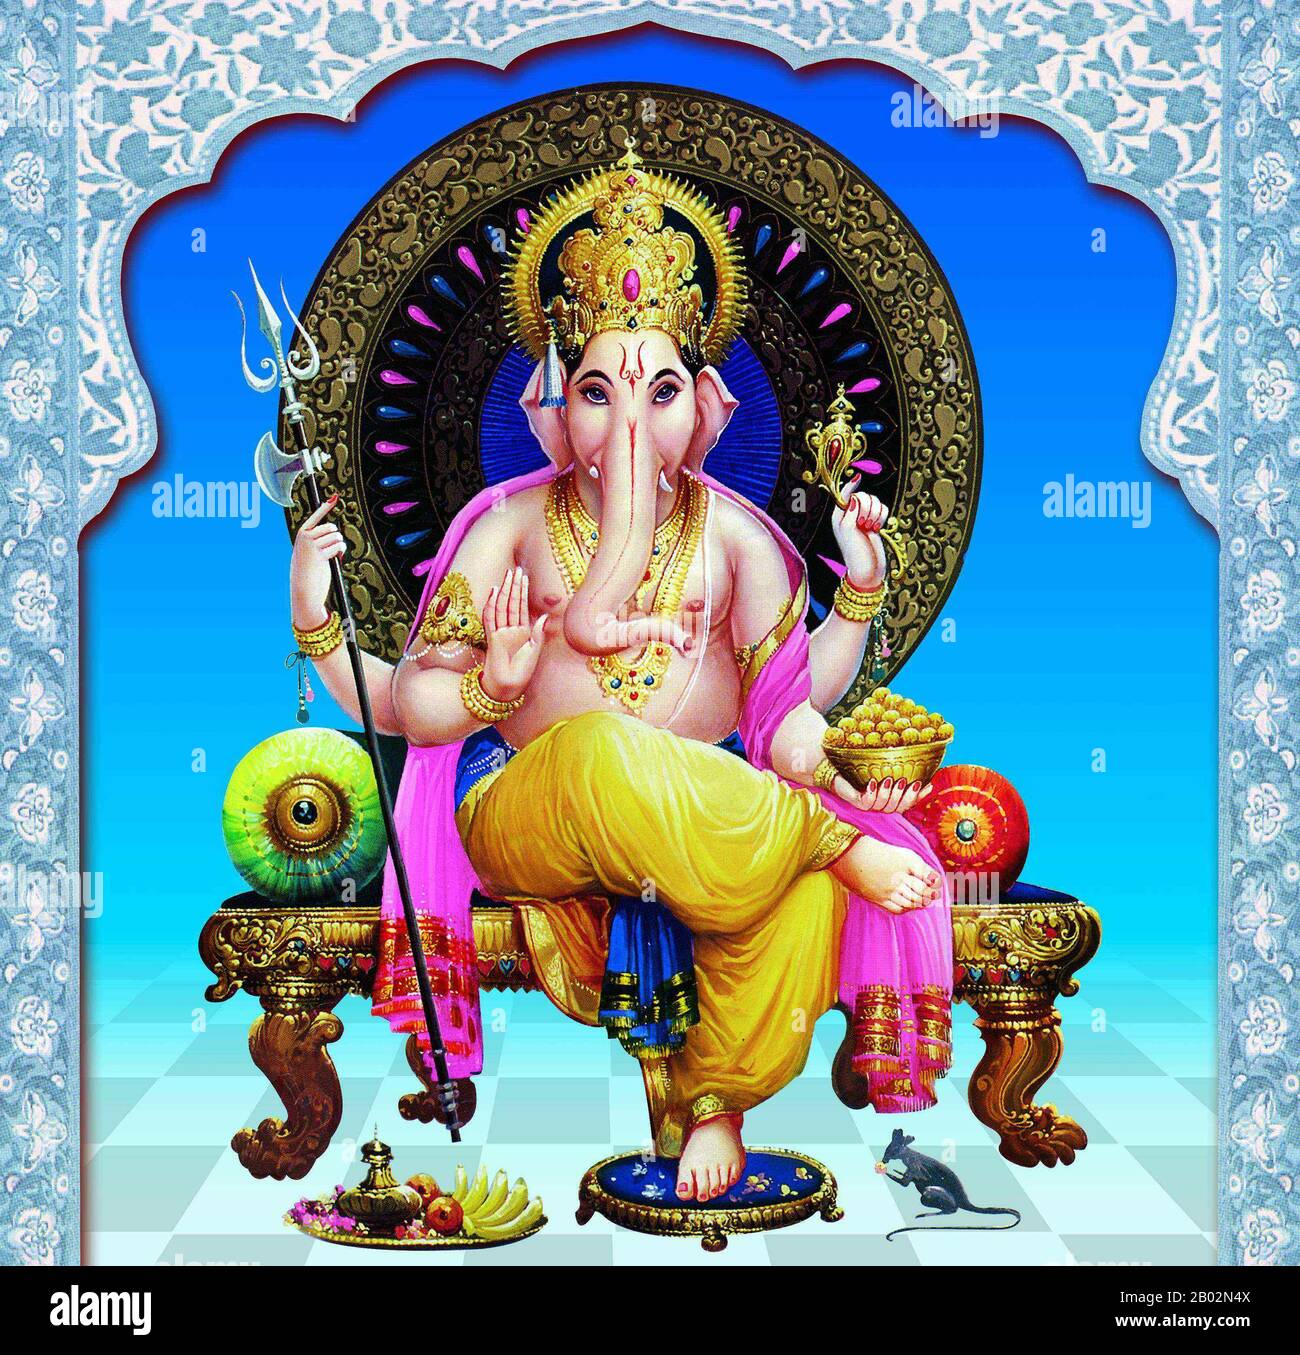 Ganesha, also spelled Ganesa or Ganesh, and also known as Ganapati, Vinayaka, and Pillaiyar, is one of the deities best-known and most widely worshipped in the Hindu pantheon.  His image is found throughout India and Nepal. Hindu sects worship him regardless of affiliations. Devotion to Ganesha is widely diffused and extends to Jains, Buddhists, and beyond India.   Ganesha Chaturthi (गणेश चतुर्थी) (వినాయక చవితి) is the Hindu festival celebrated in honour of the god Ganesha, the elephant-headed, remover of obstacles and the god of beginnings and wisdom. The festival, also known as Vinayaka Chat Stock Photo